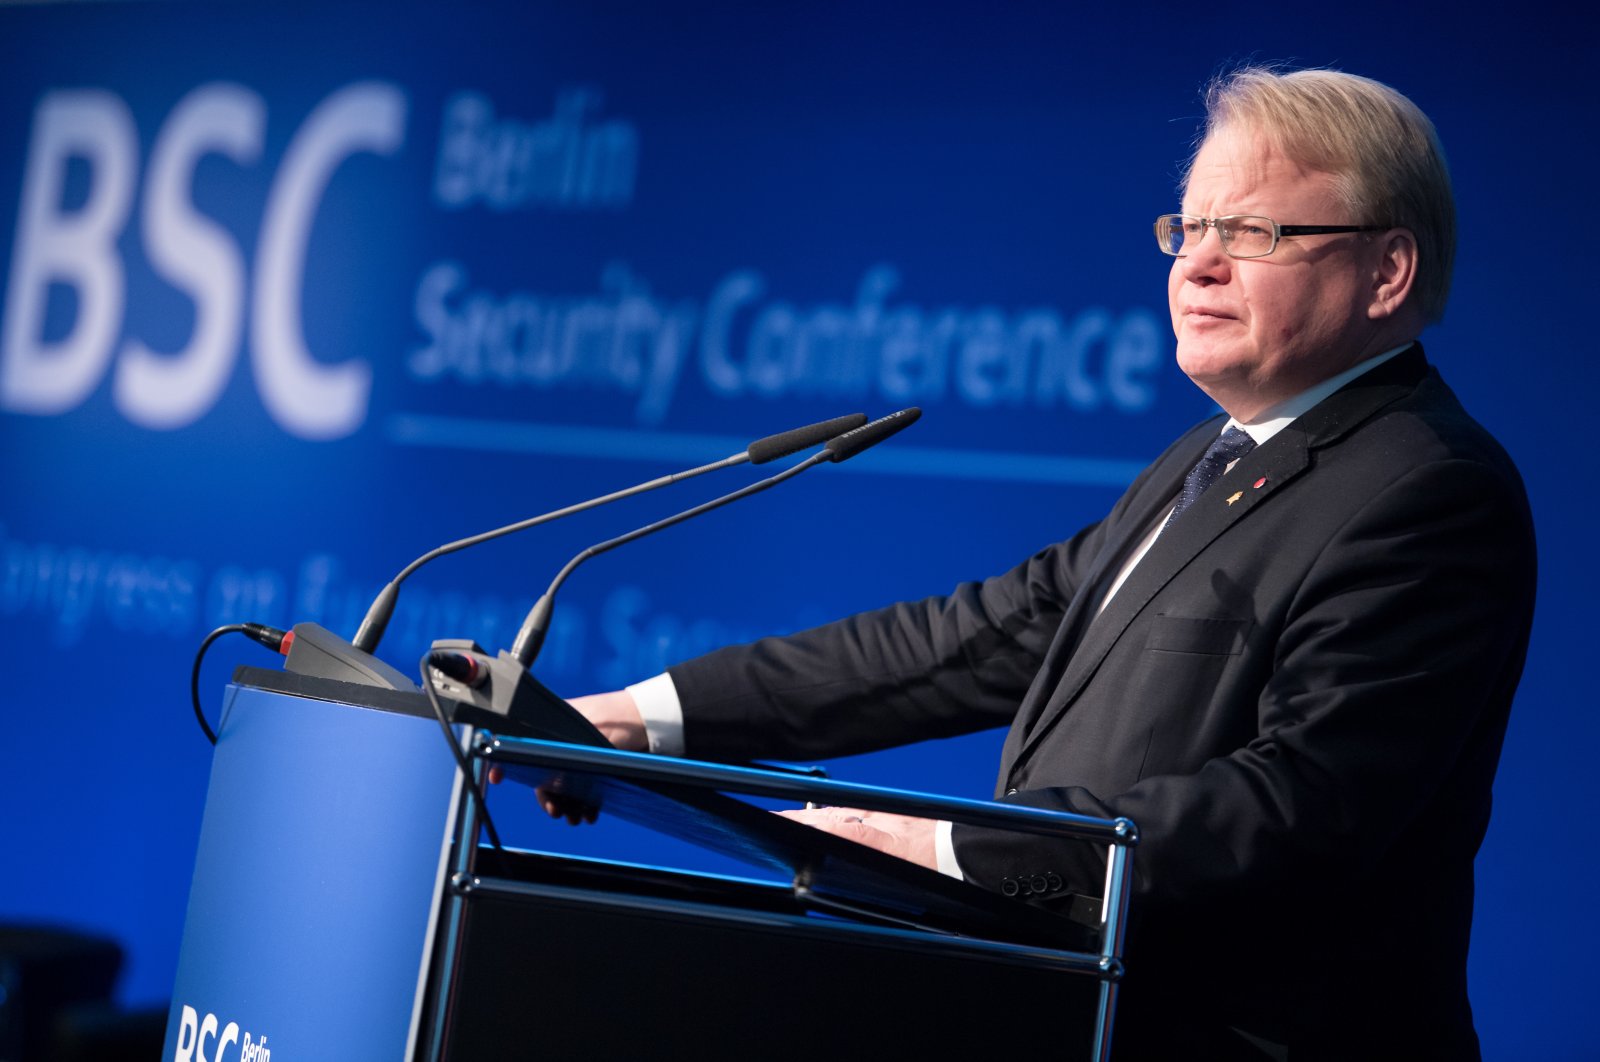 Swedish Defence Minister Peter Hultqvist speaks during the Berlin Security Conference on European Security and Defence in Berlin, Germany, Nov. 28, 2017. (Photo by Getty Images)